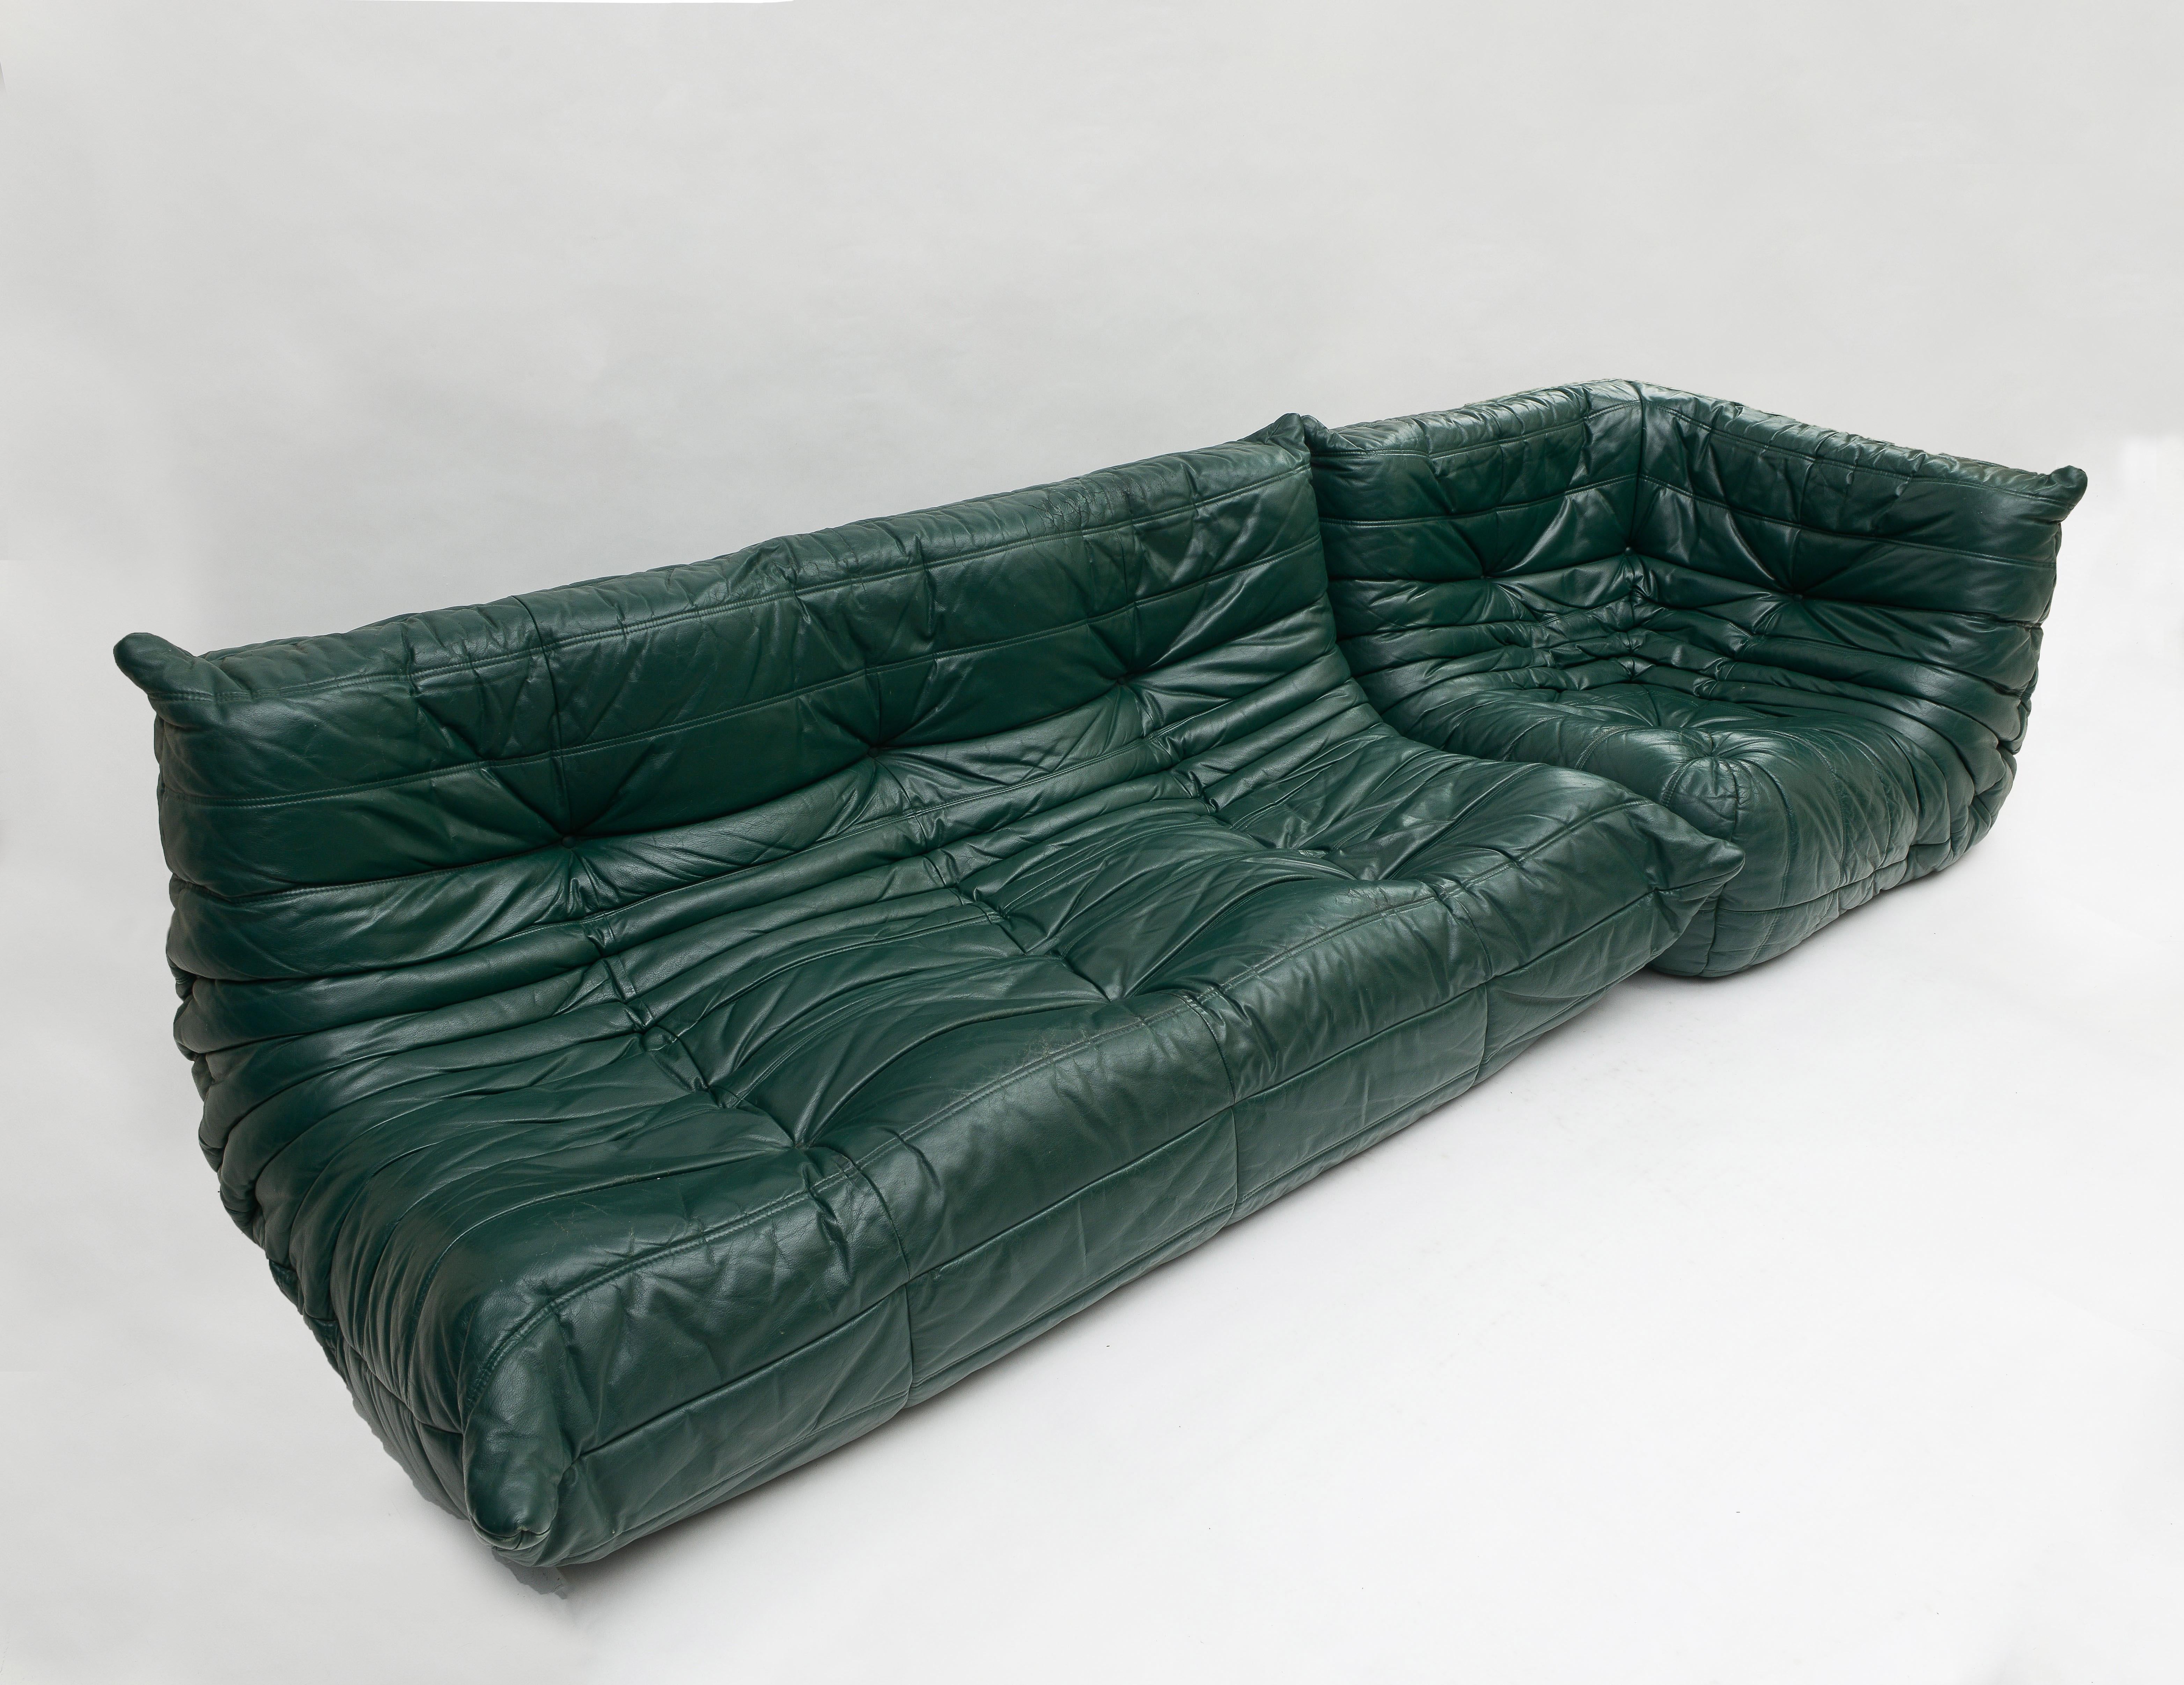 Beautiful green leather ligne roset sofa and corner chair. Green leather is lovely and supple. Seating is very comfortable. 
Great Vintage Design pieces
France 1980's

Measures: Sofa is 67 wide, 27 high, 38 inches deep, sh 12 inches

Chair is